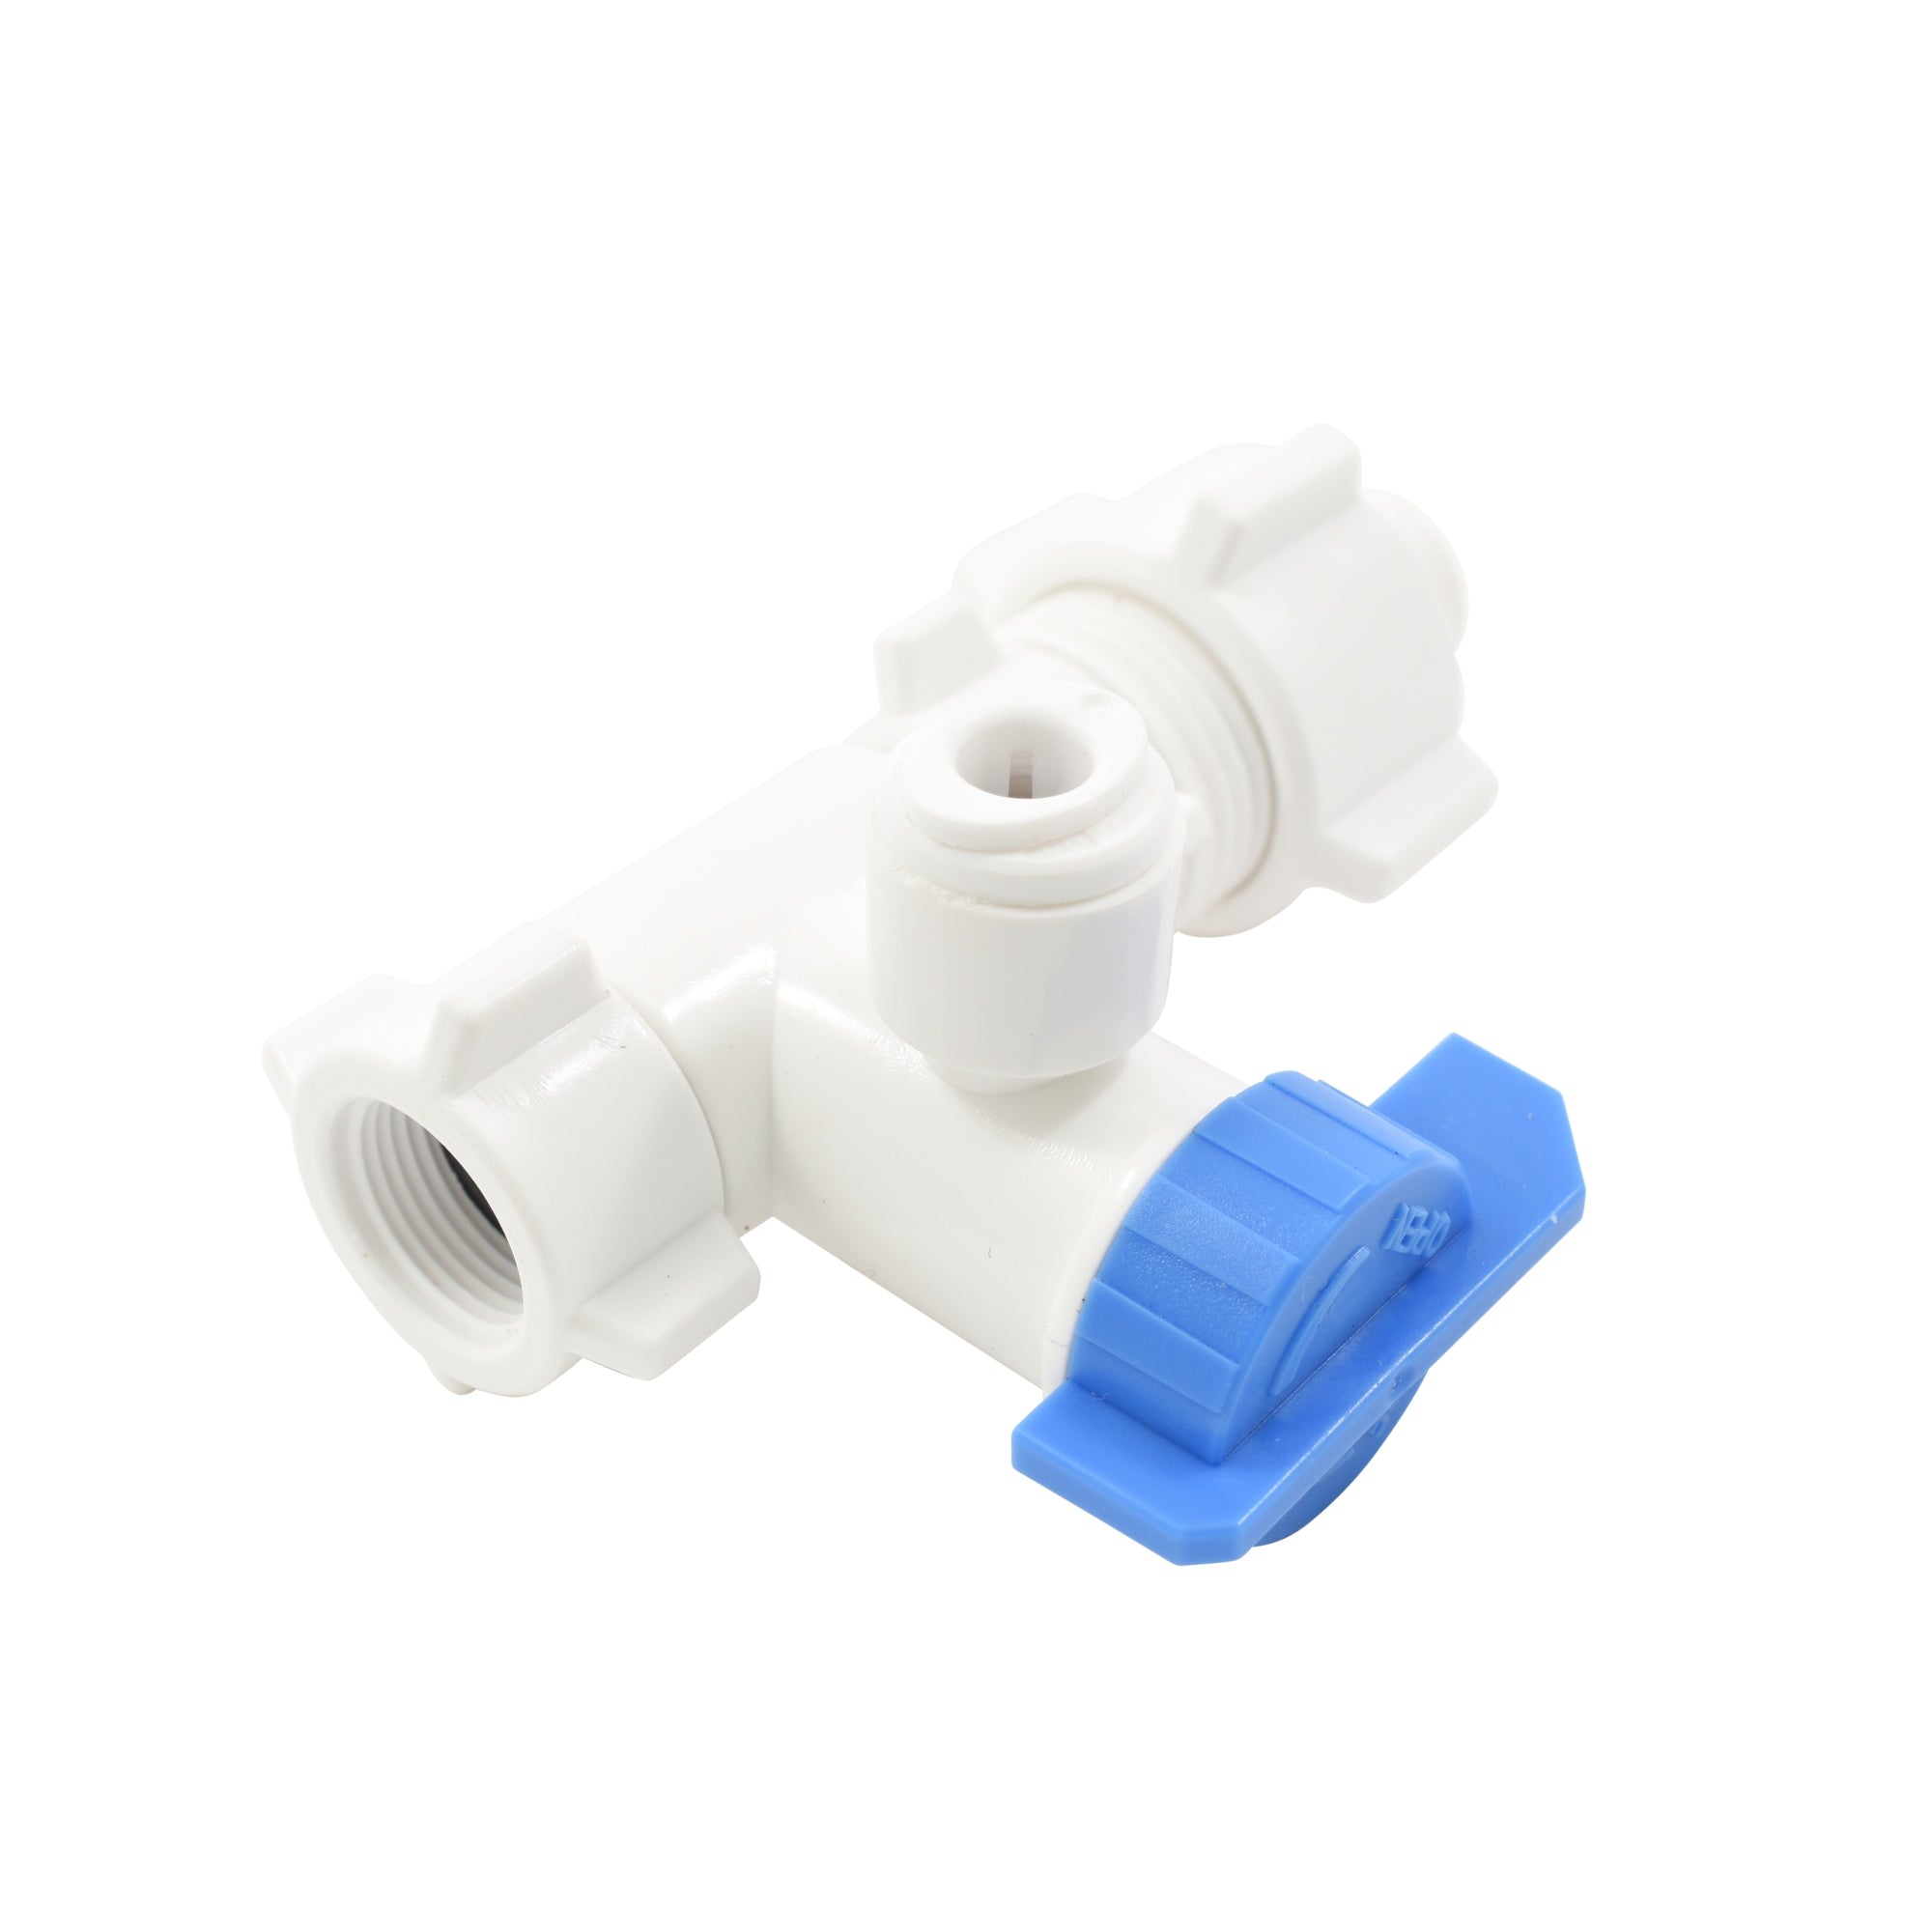 Feed Water Adapter  -  1/2" NPT or 3/8" Compression, 1/4" Quick Connect, Angle Stop